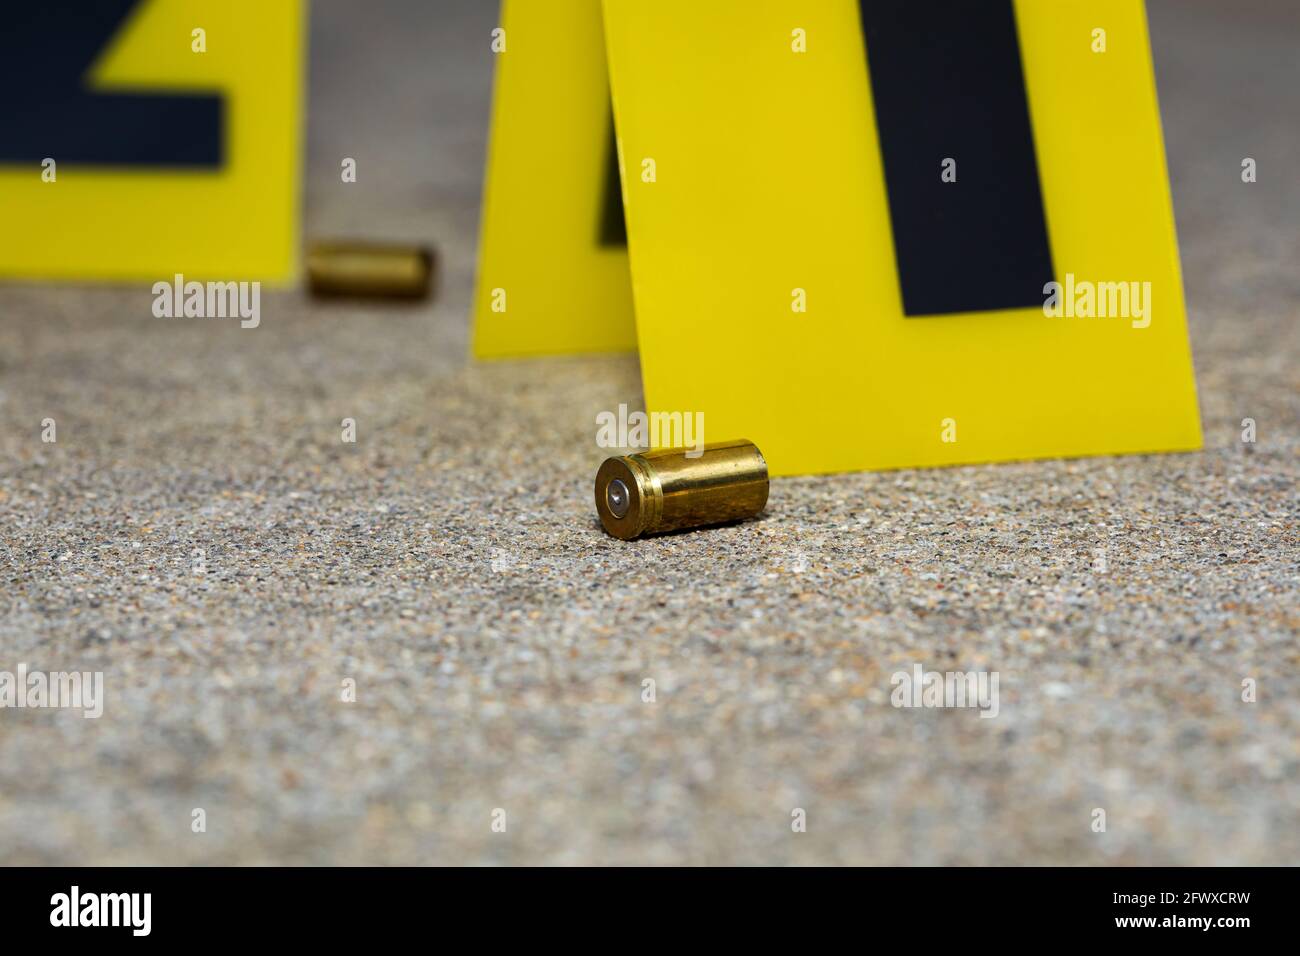 Gun shell casing at crime scene. Gun violence, mass shooting and homicide investigation concept. Stock Photo